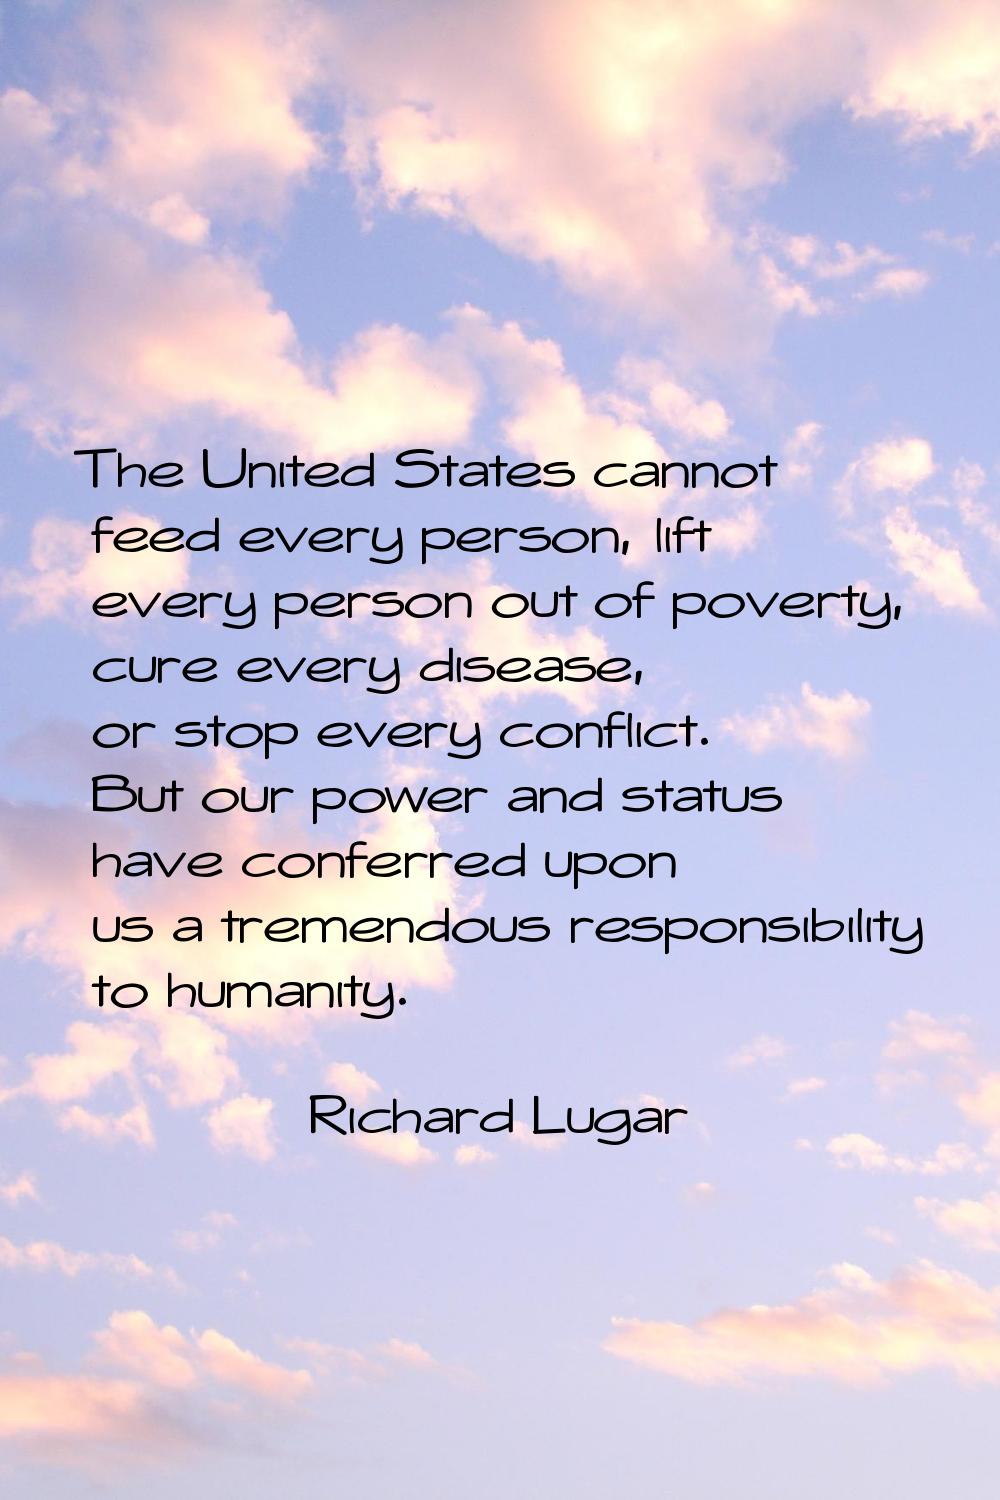 The United States cannot feed every person, lift every person out of poverty, cure every disease, o